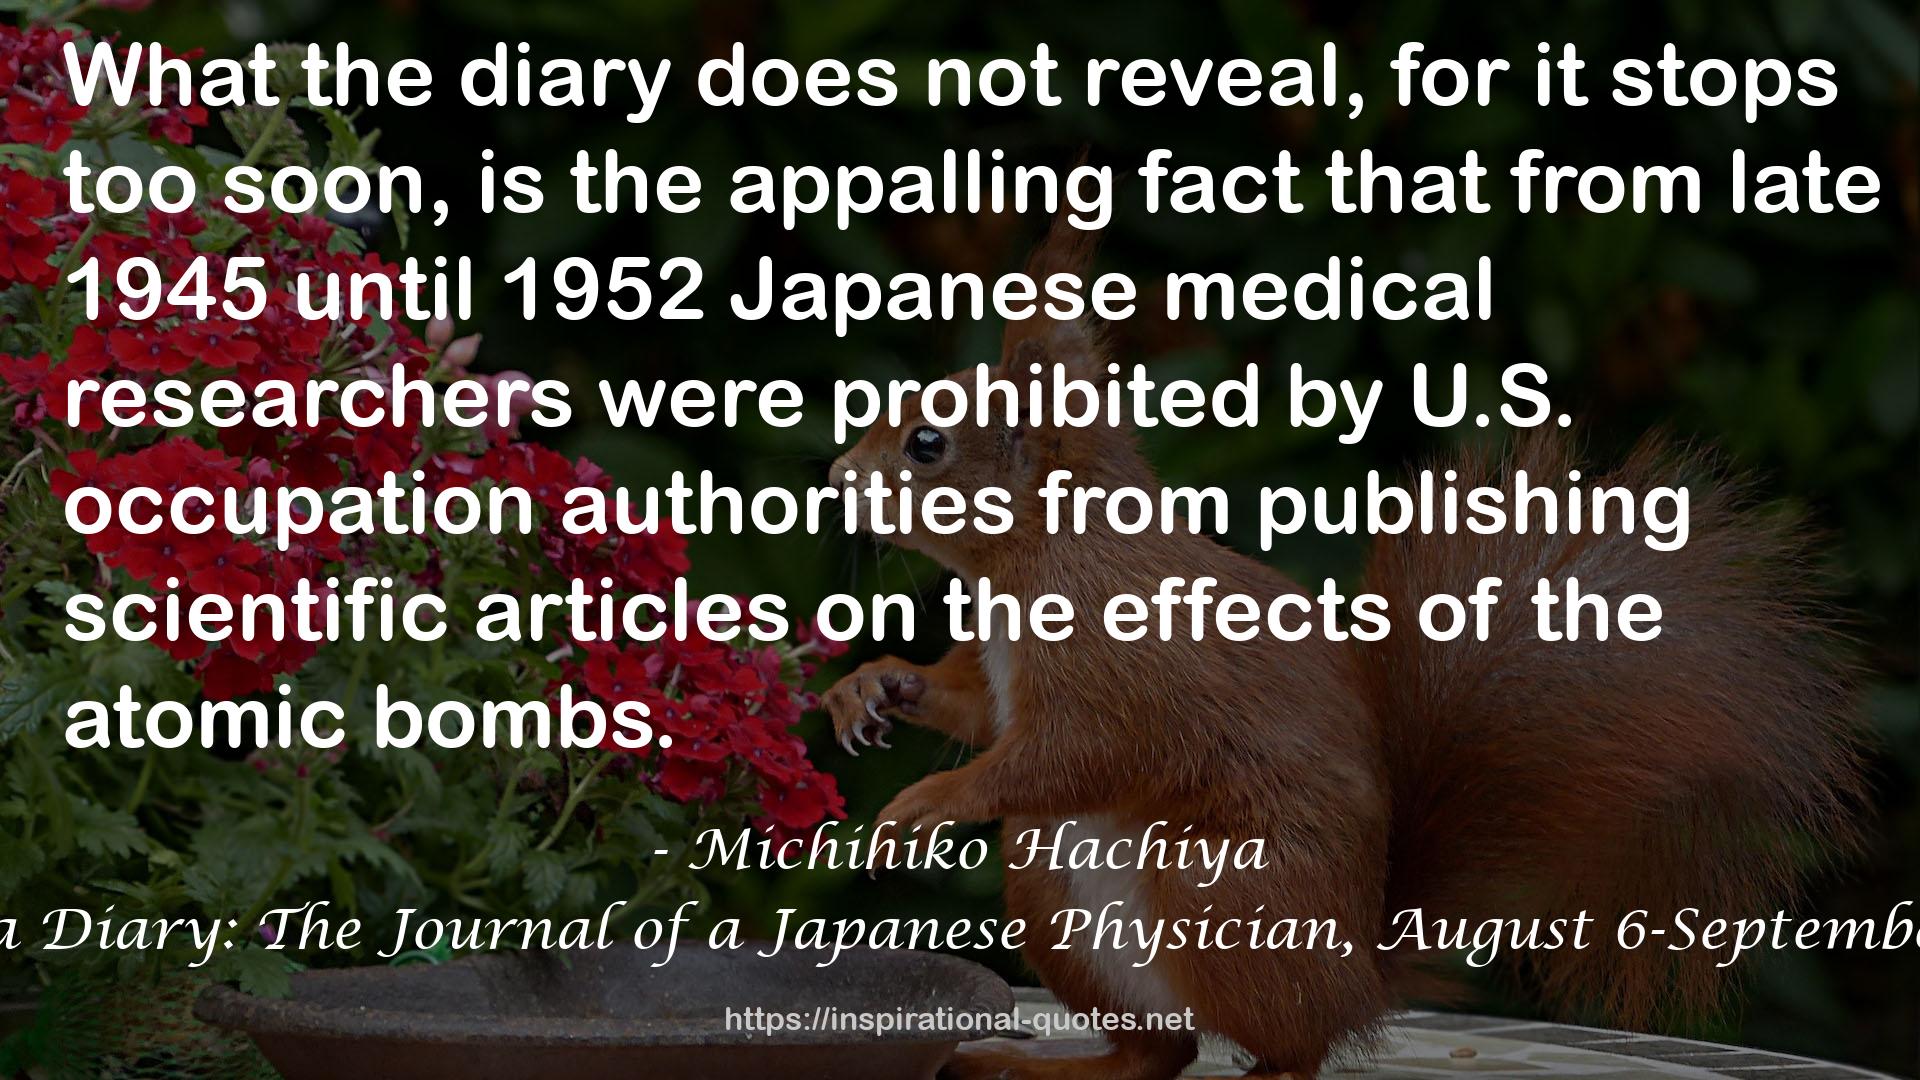 Hiroshima Diary: The Journal of a Japanese Physician, August 6-September 30, 1945 QUOTES